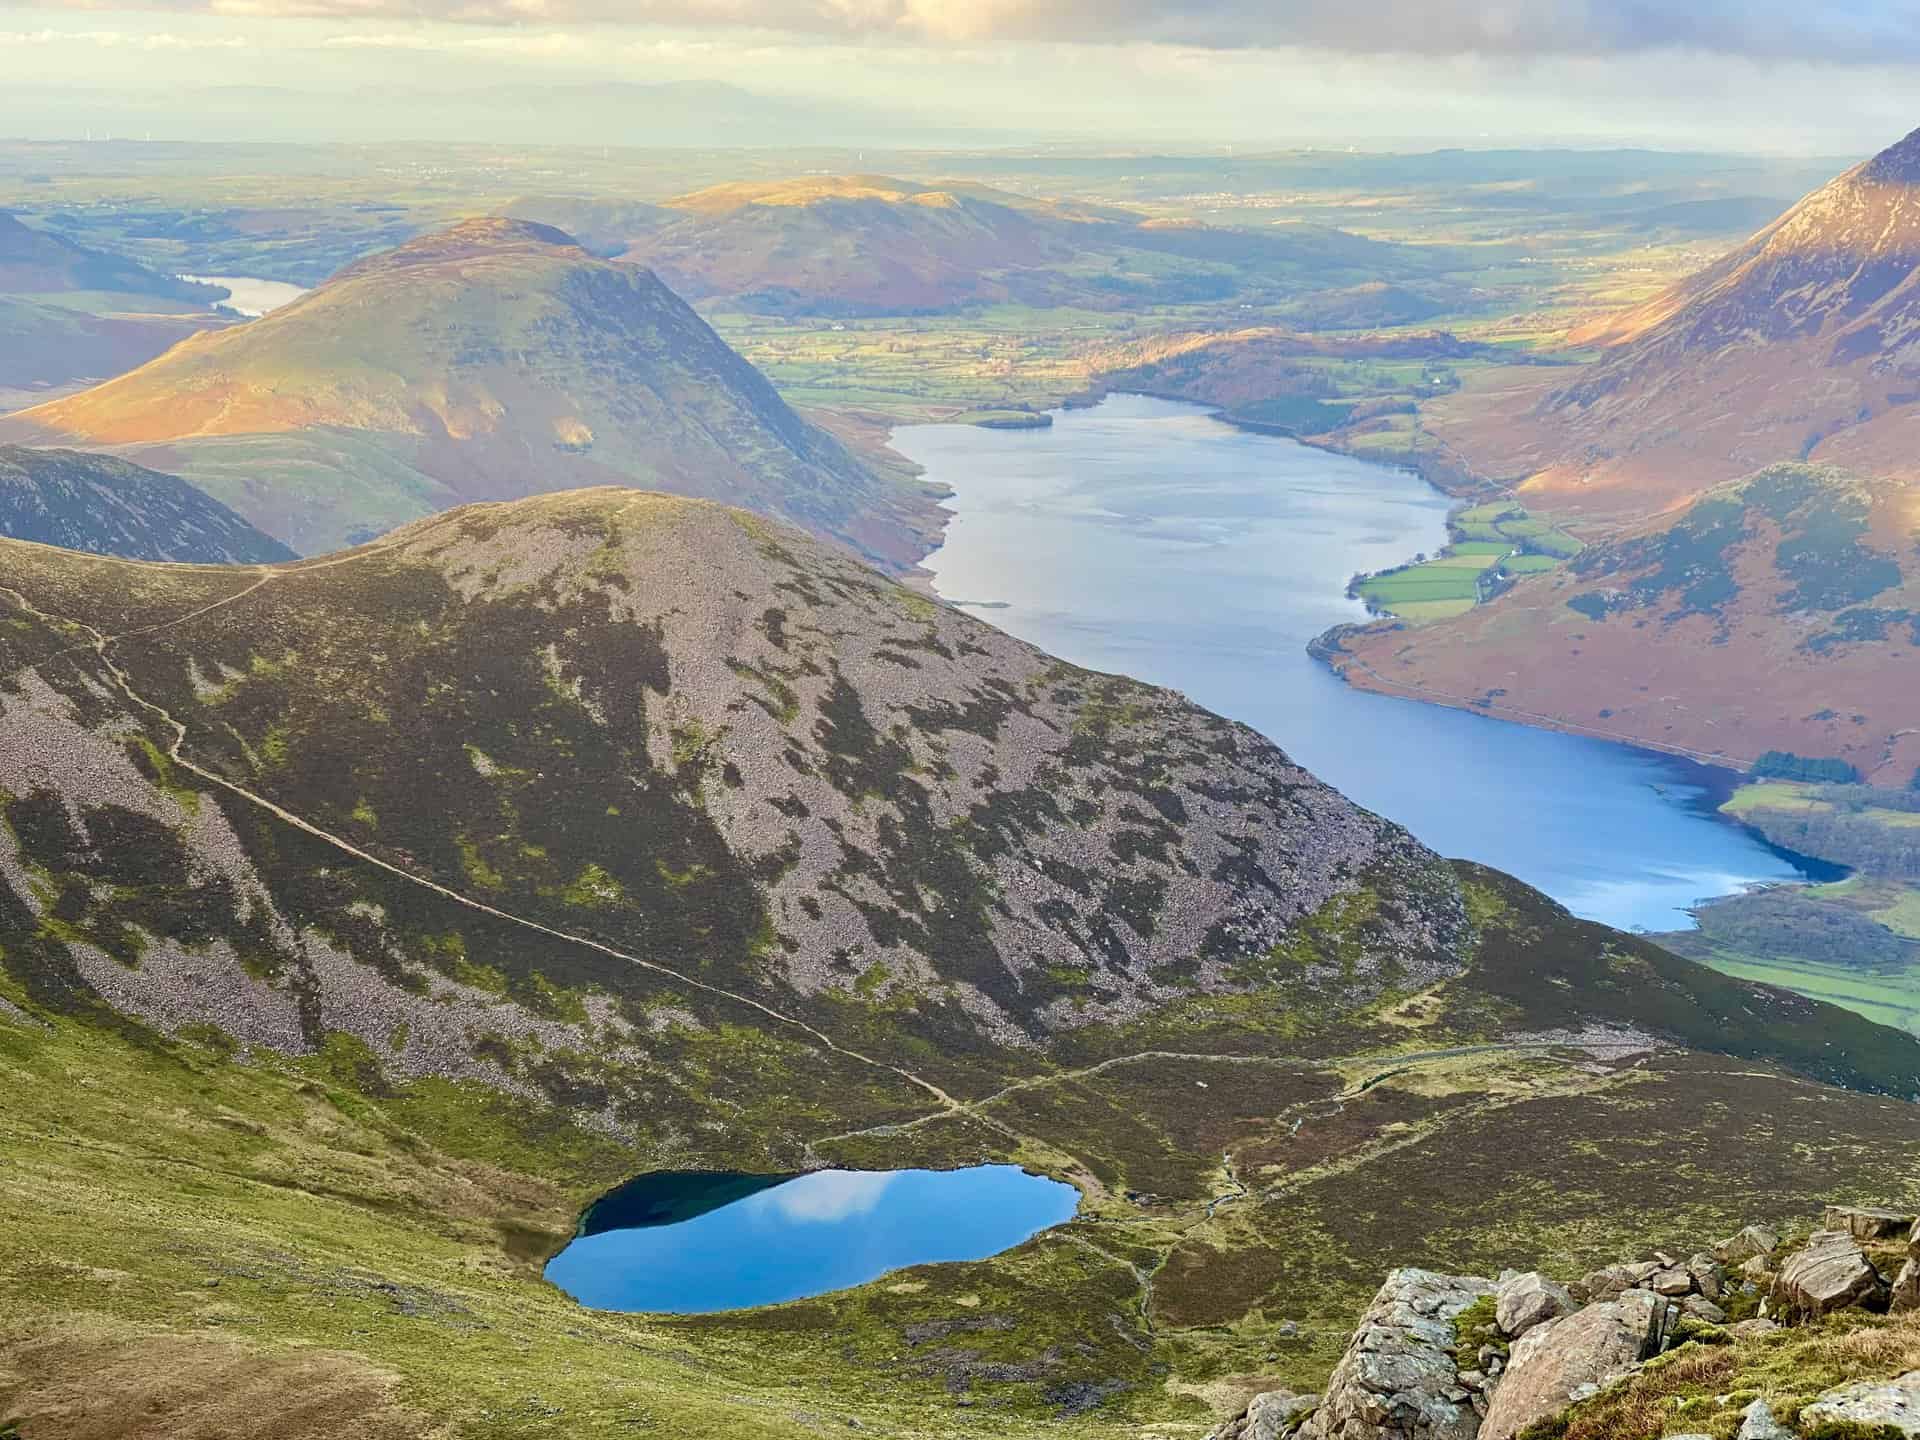 More magnificent panoramas from the top of High Stile, including the distant Loweswater, a smaller lake to the north-west of Crummock Water. As the highest point on the High Stile walk and the second mountain along the ridge, High Stile stands at 806 metres (2645 feet).